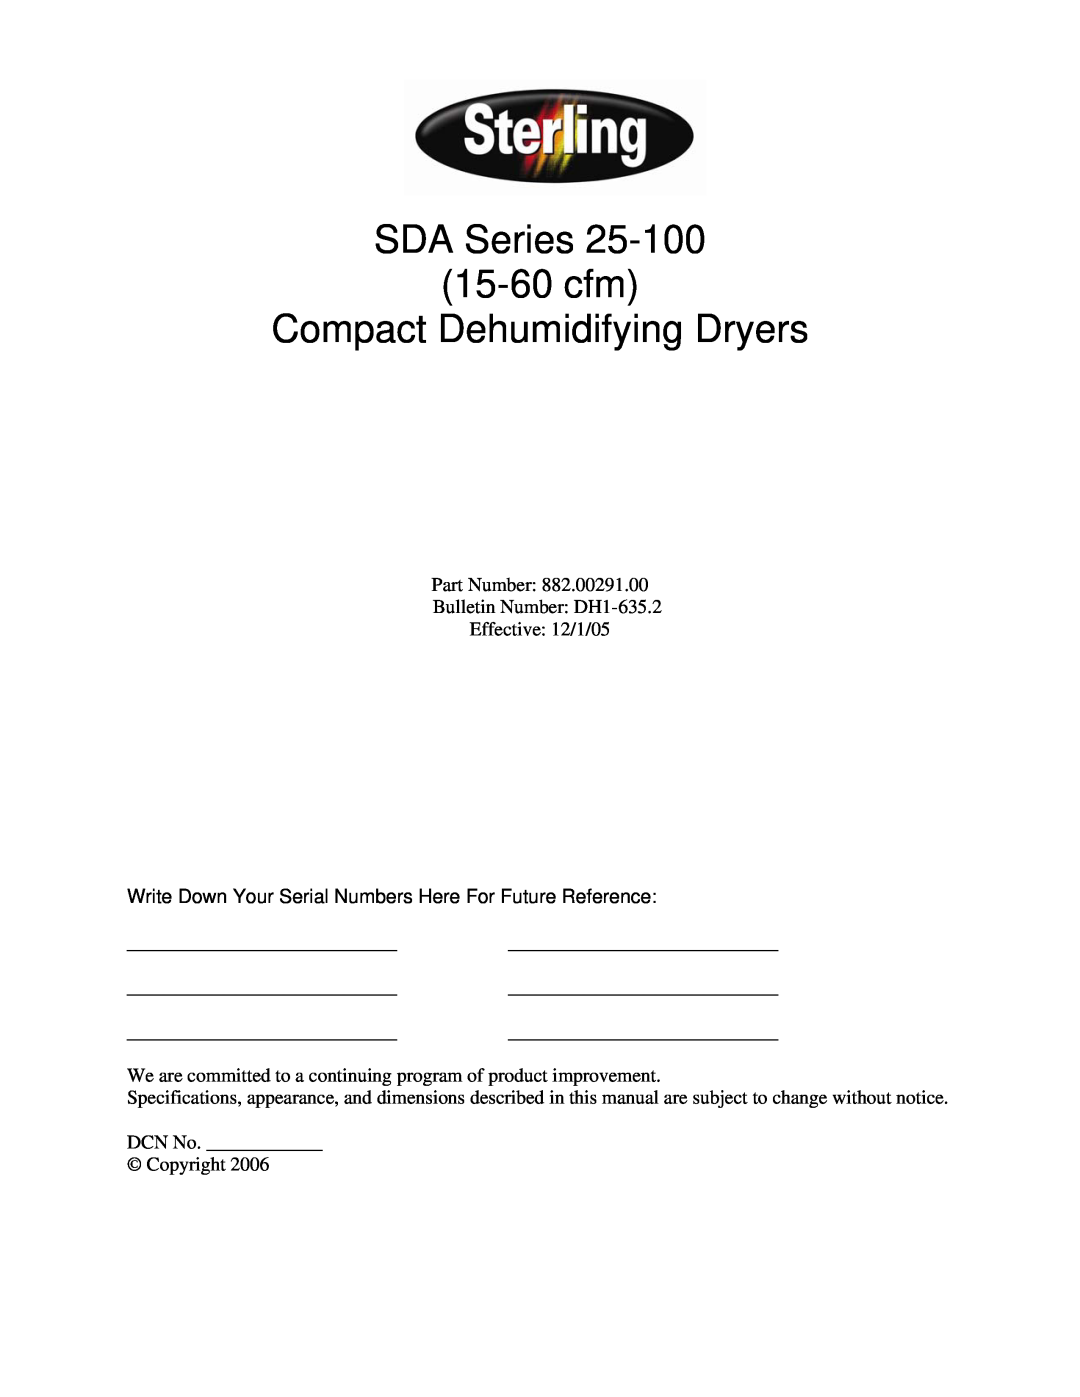 Sterling 882.00291.00 specifications SDA Series 15-60cfm Compact Dehumidifying Dryers 